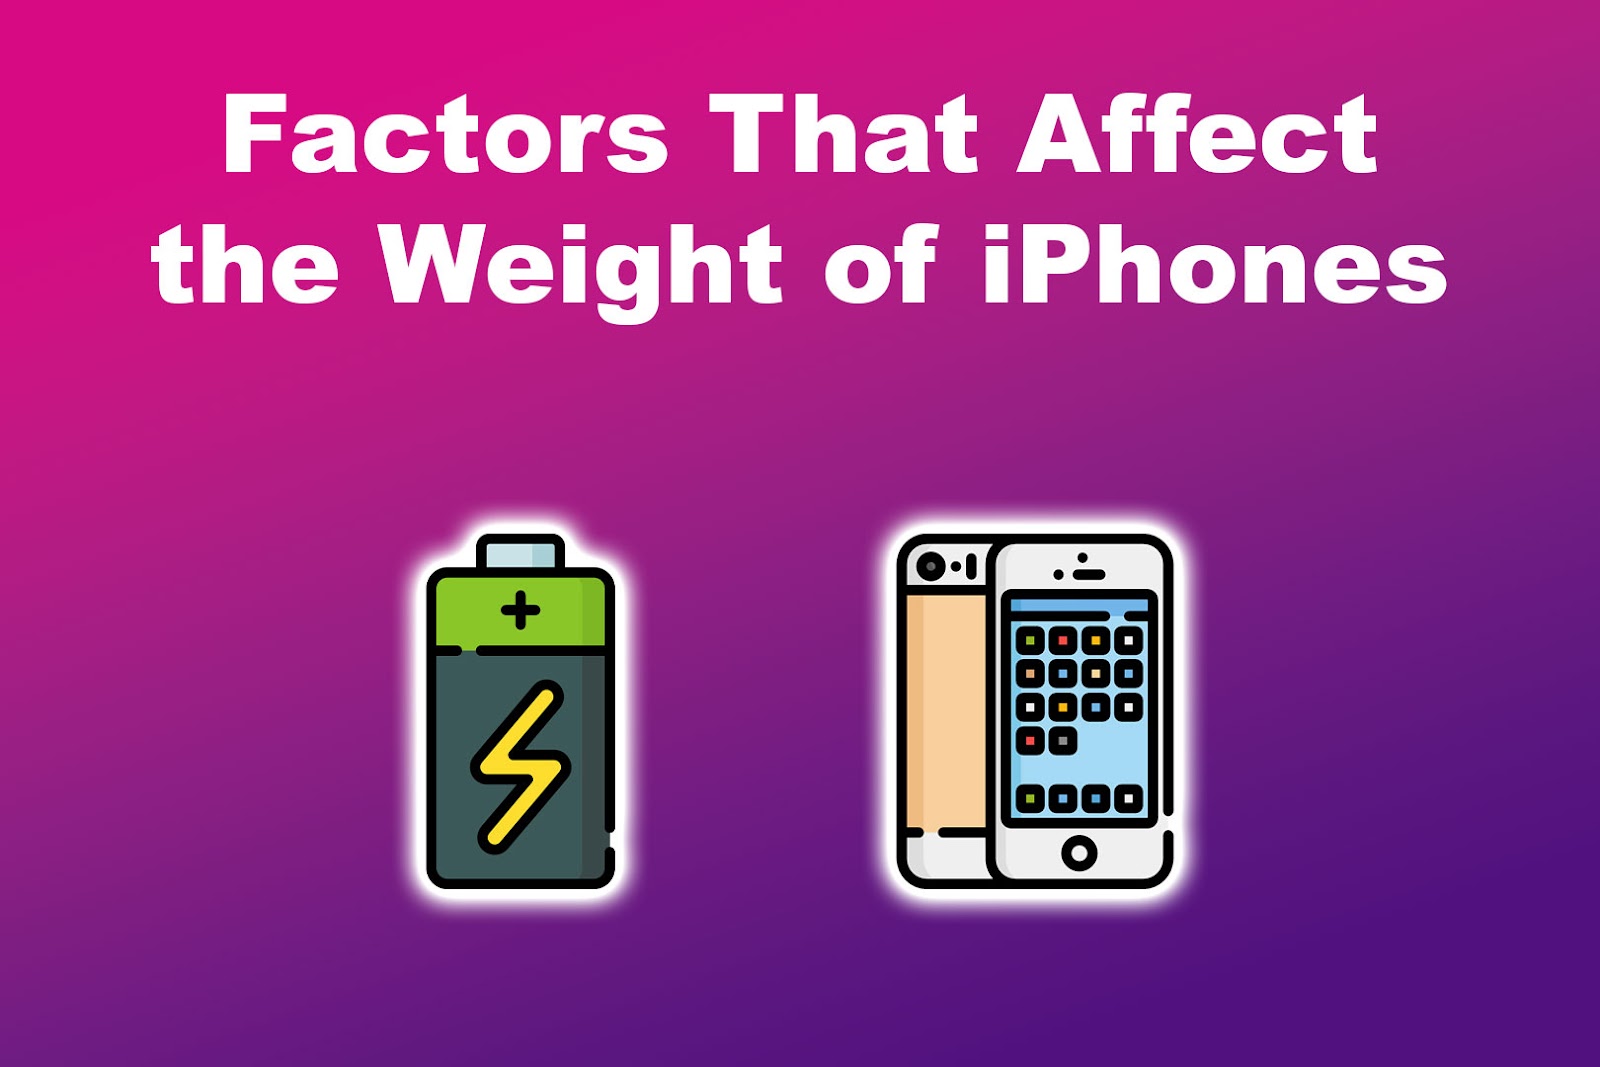 Factors That Affect the Weight of iPhones